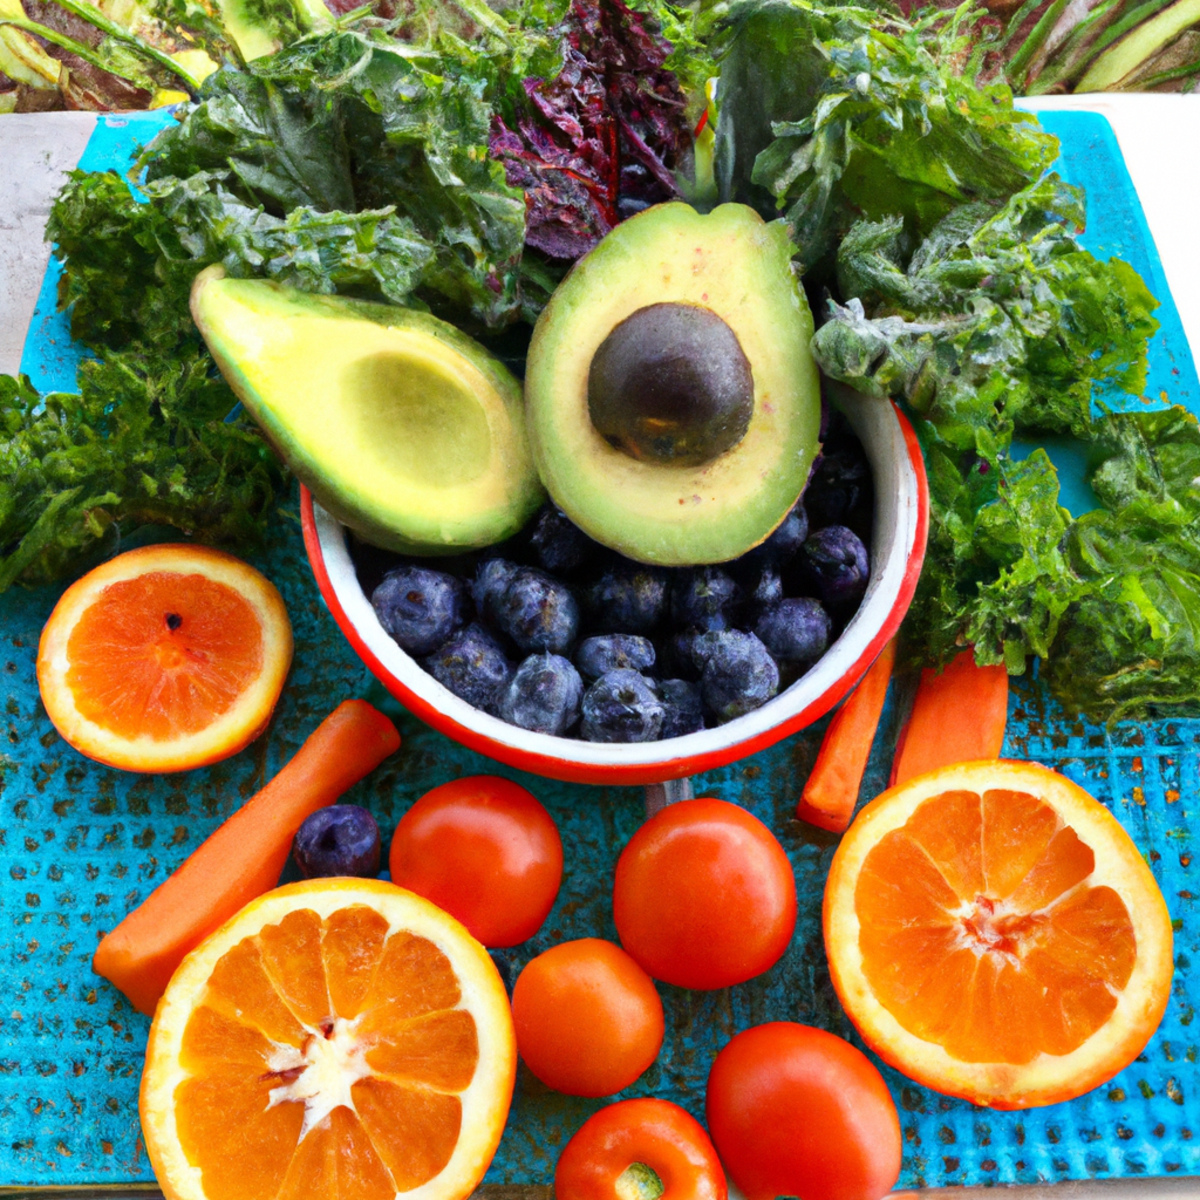 The photo captures a colorful array of fruits and vegetables arranged in a beautiful display. A ripe red tomato sits next to a vibrant orange carrot, while a bunch of leafy green kale is nestled in between. A bowl of juicy blueberries and a sliced avocado add pops of blue and green to the mix. The objects are arranged in a way that highlights their natural beauty and showcases the variety of functional foods that can help reverse chronic diseases. The photo is a visual representation of the power of these foods to nourish and heal the body.